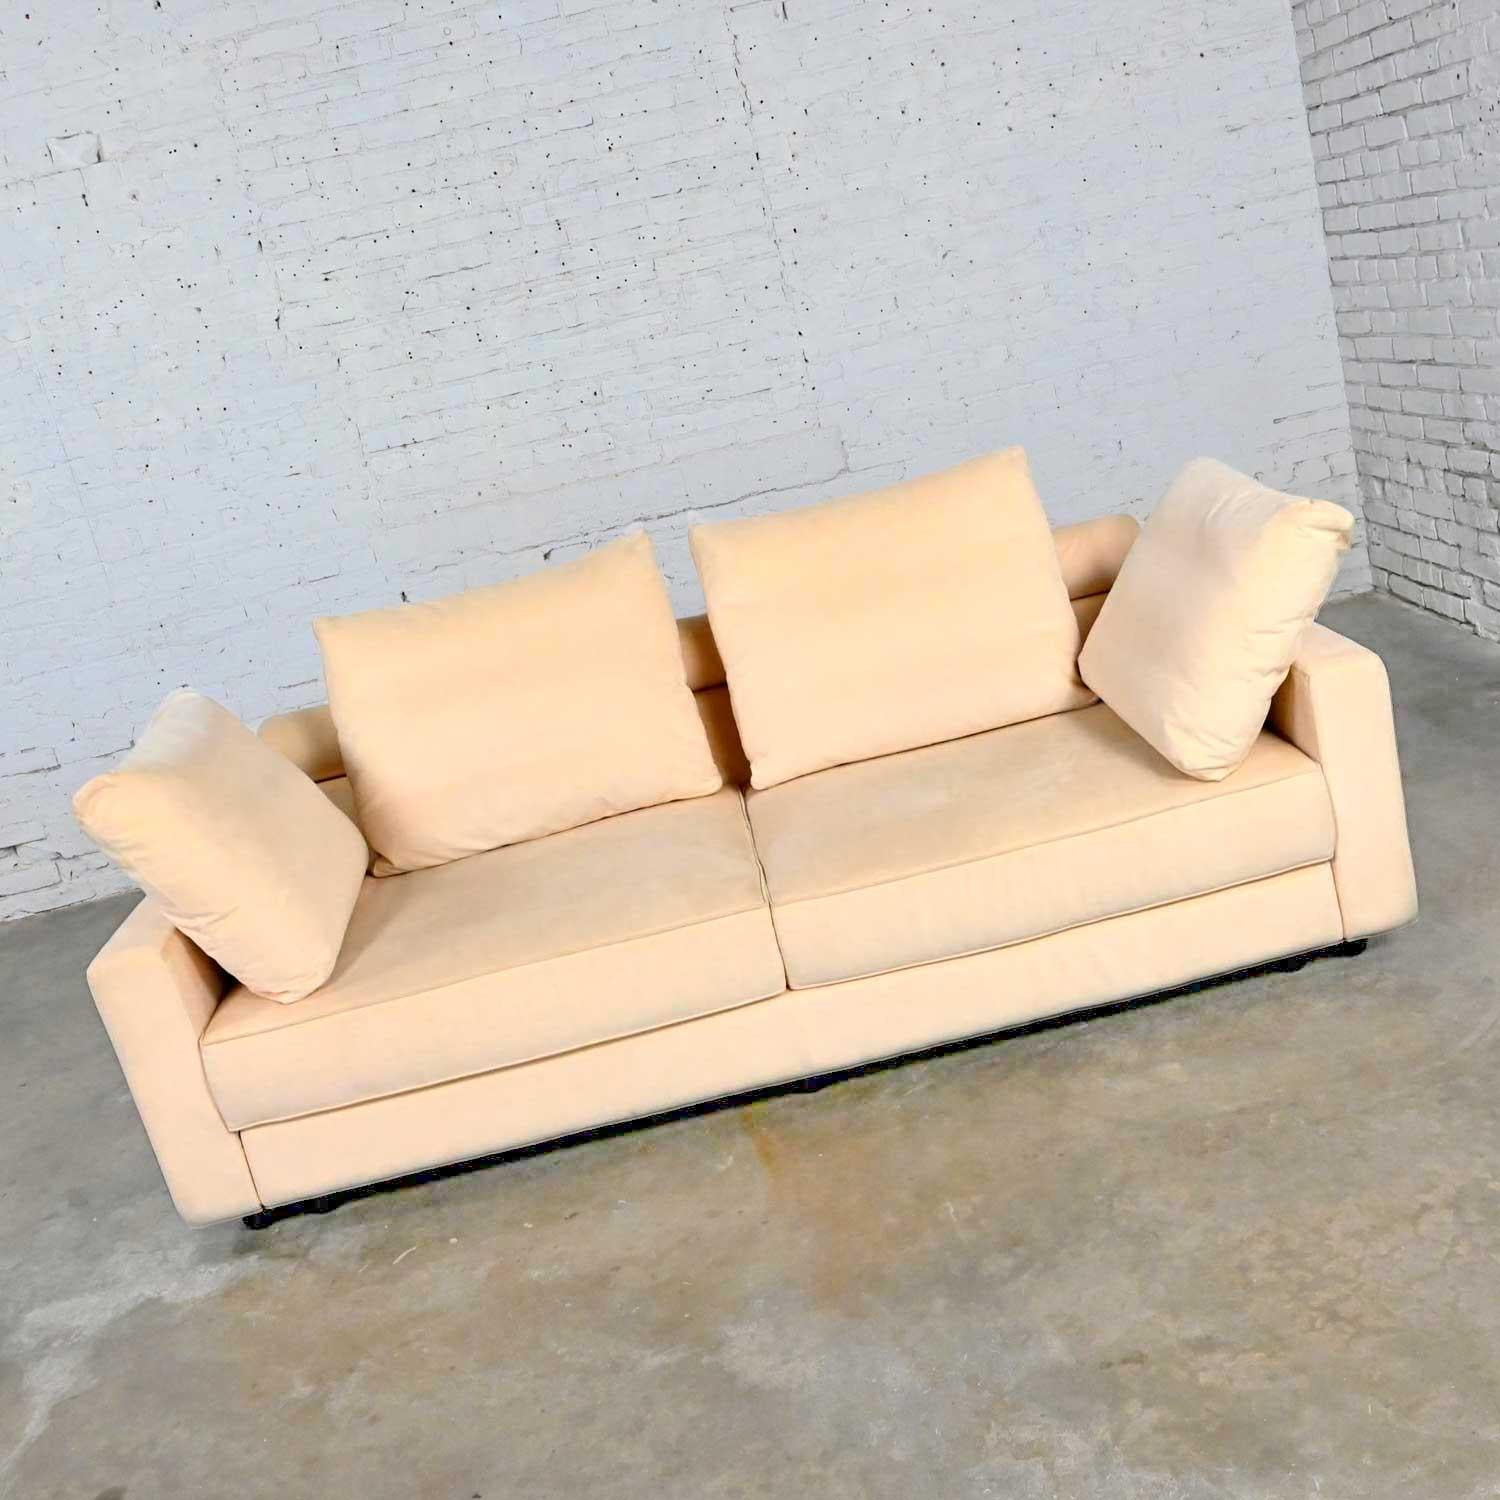 Gorgeous Roche Bobois vintage postmodern off-white ultra-suede sofa. Beautiful condition, keeping in mind that this is vintage and not new so will have signs of use and wear. There are stains several places on sofa, but we have not attempted to